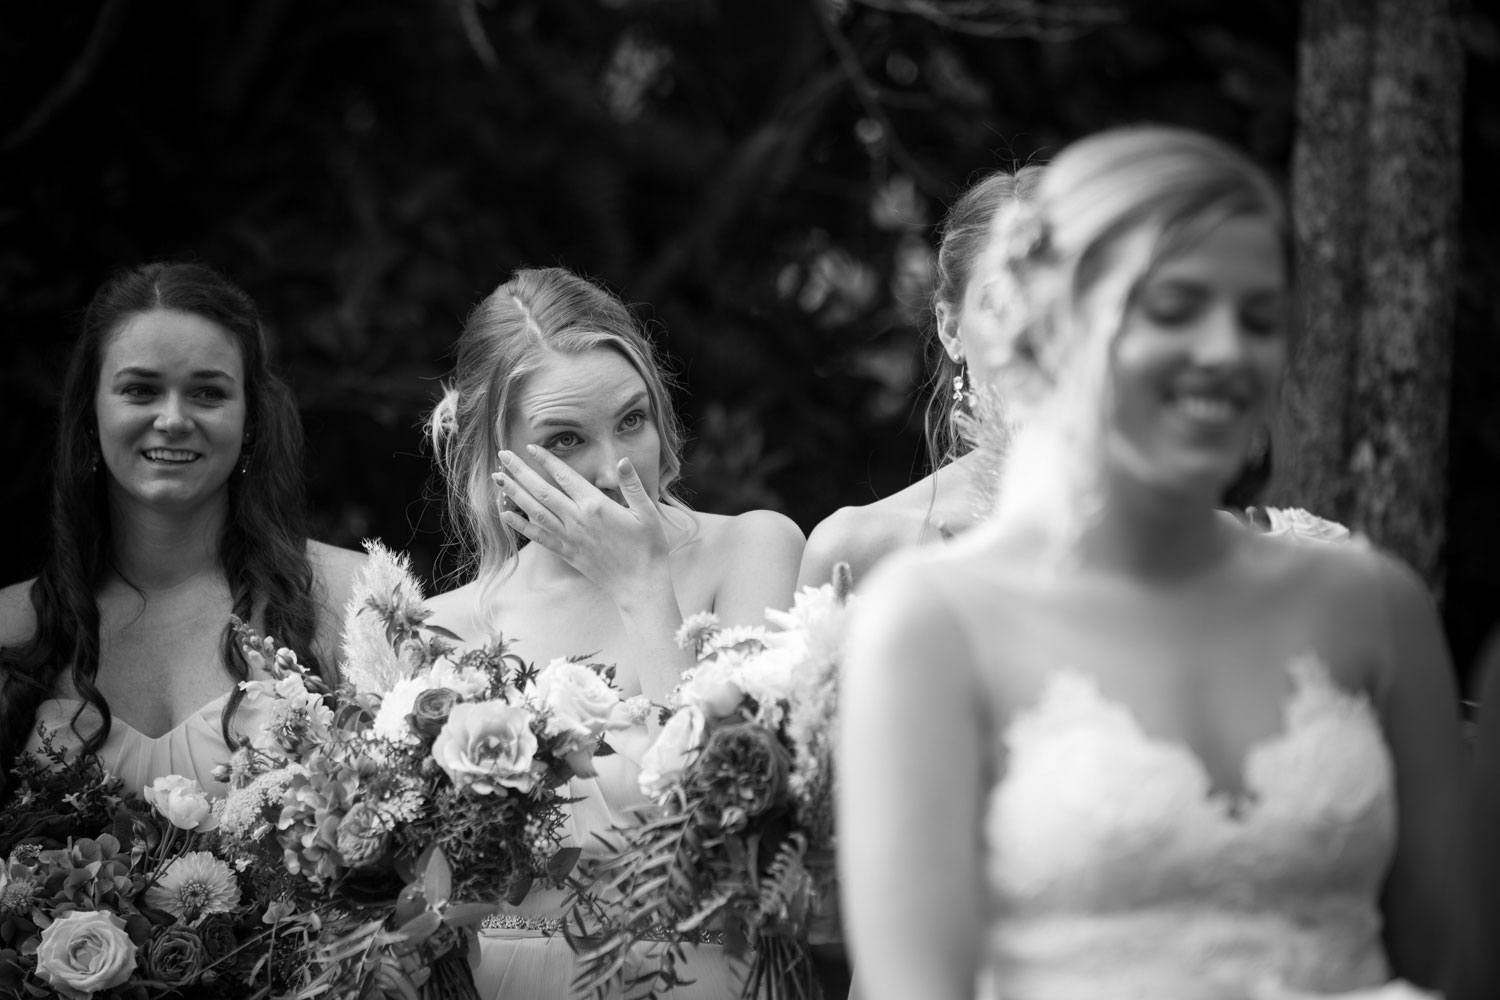 auckland wedding bridesmaid cry during ceremony